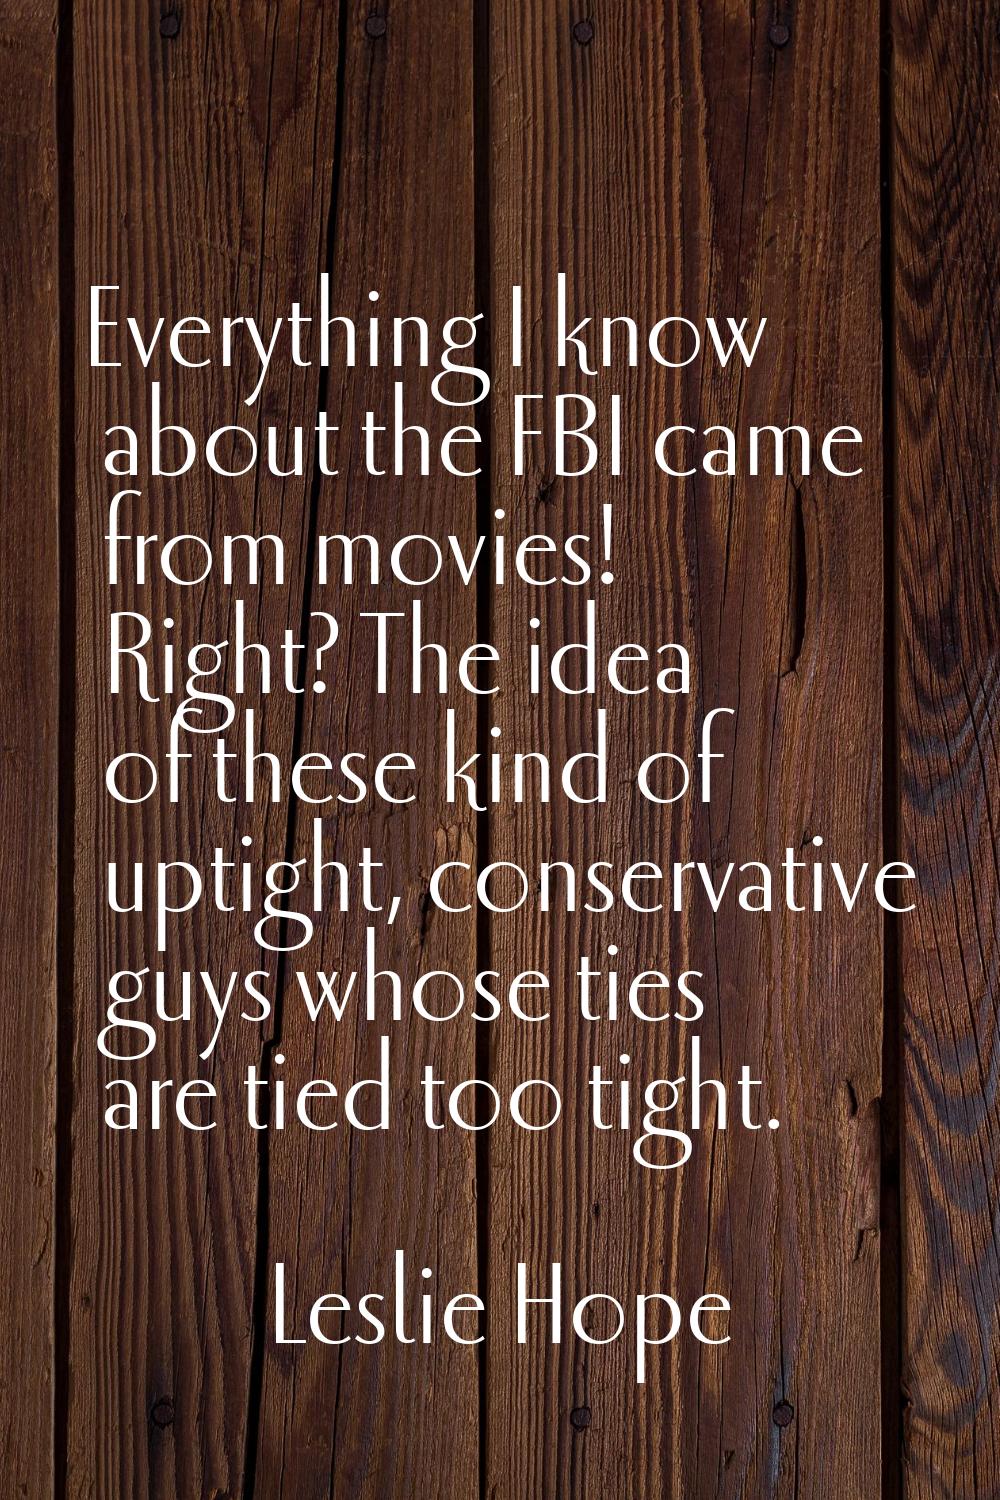 Everything I know about the FBI came from movies! Right? The idea of these kind of uptight, conserv